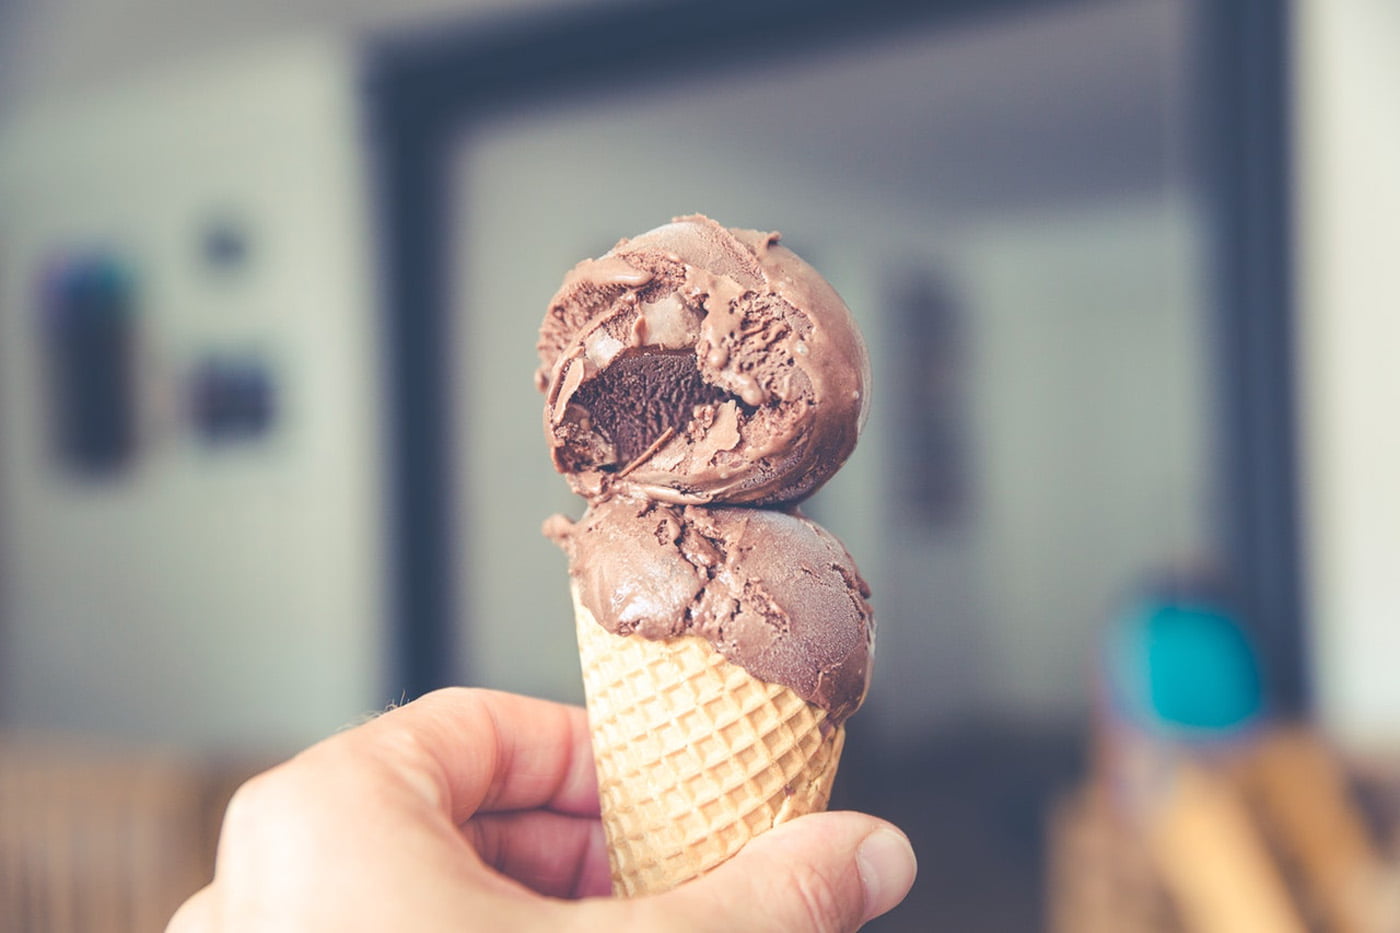 500 Calories or Less: Chocolate Sorbet